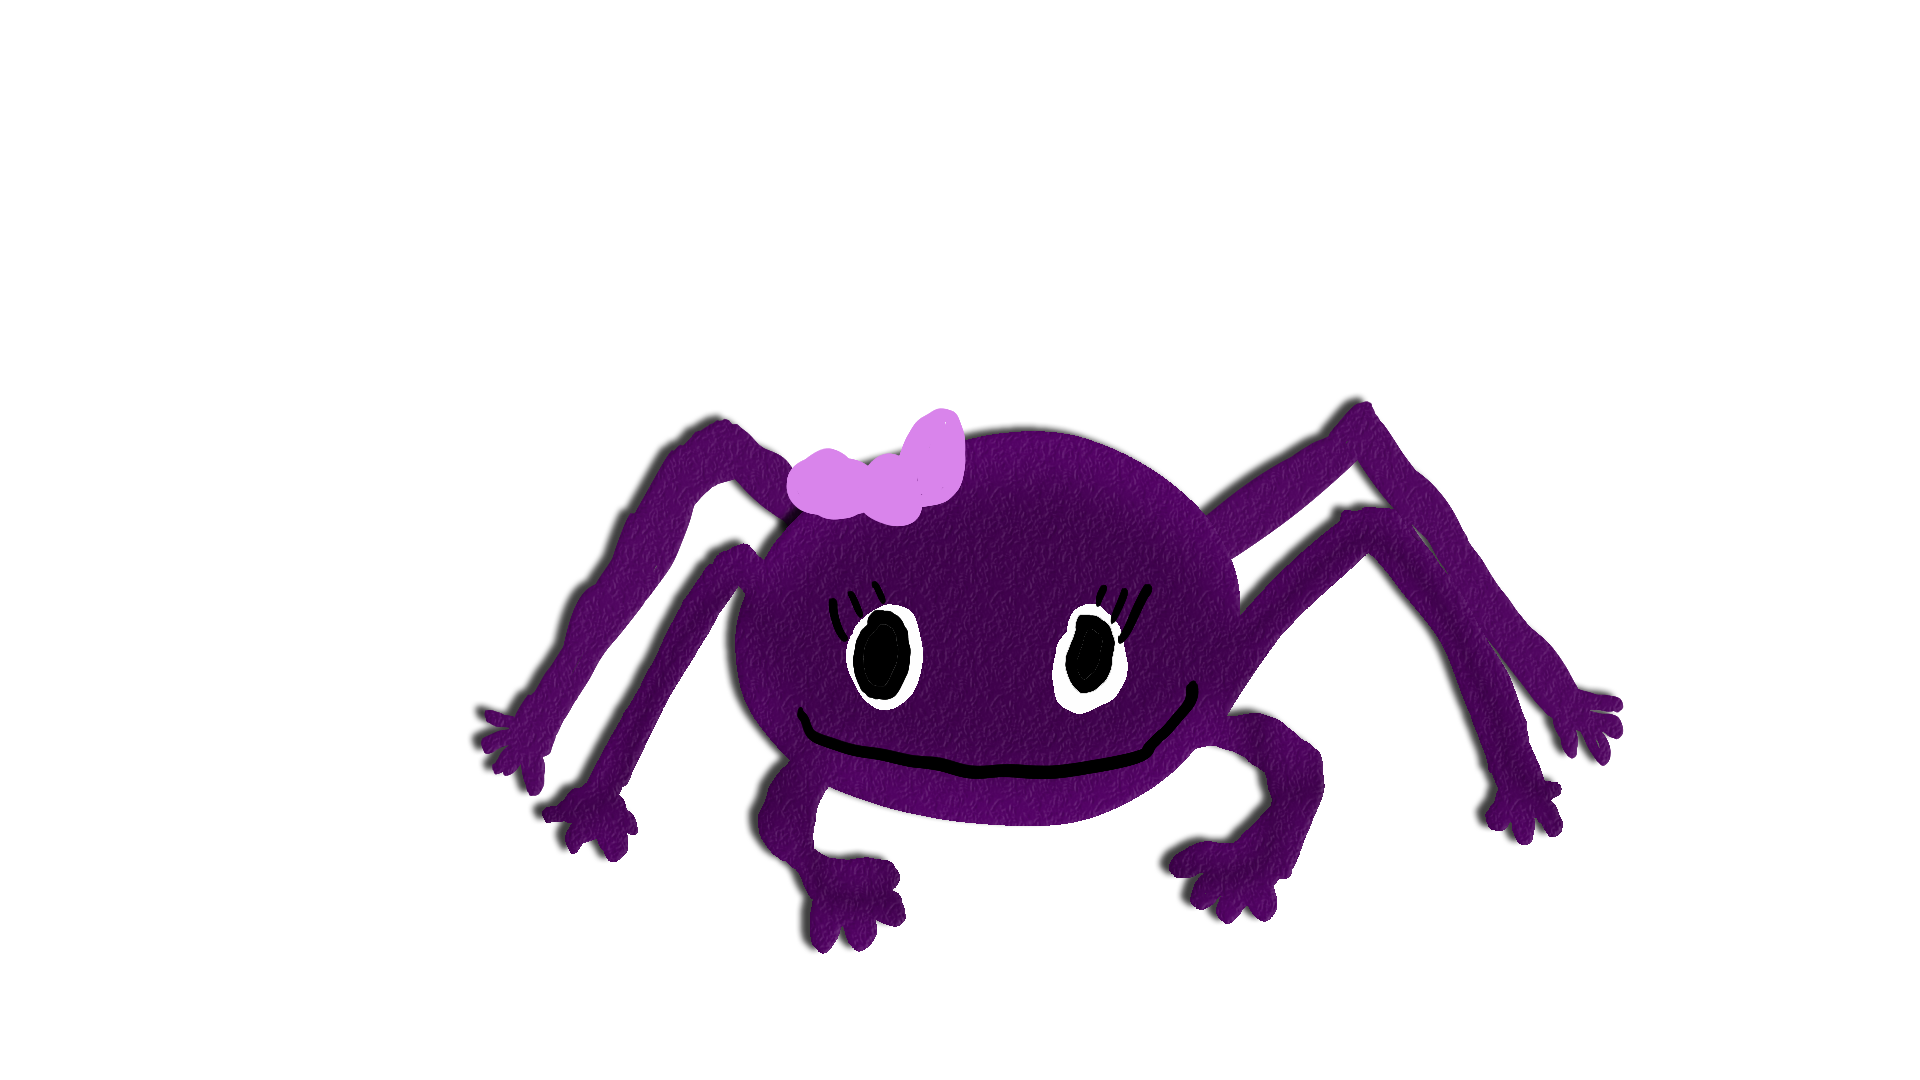 Spider with bow on head (girl)